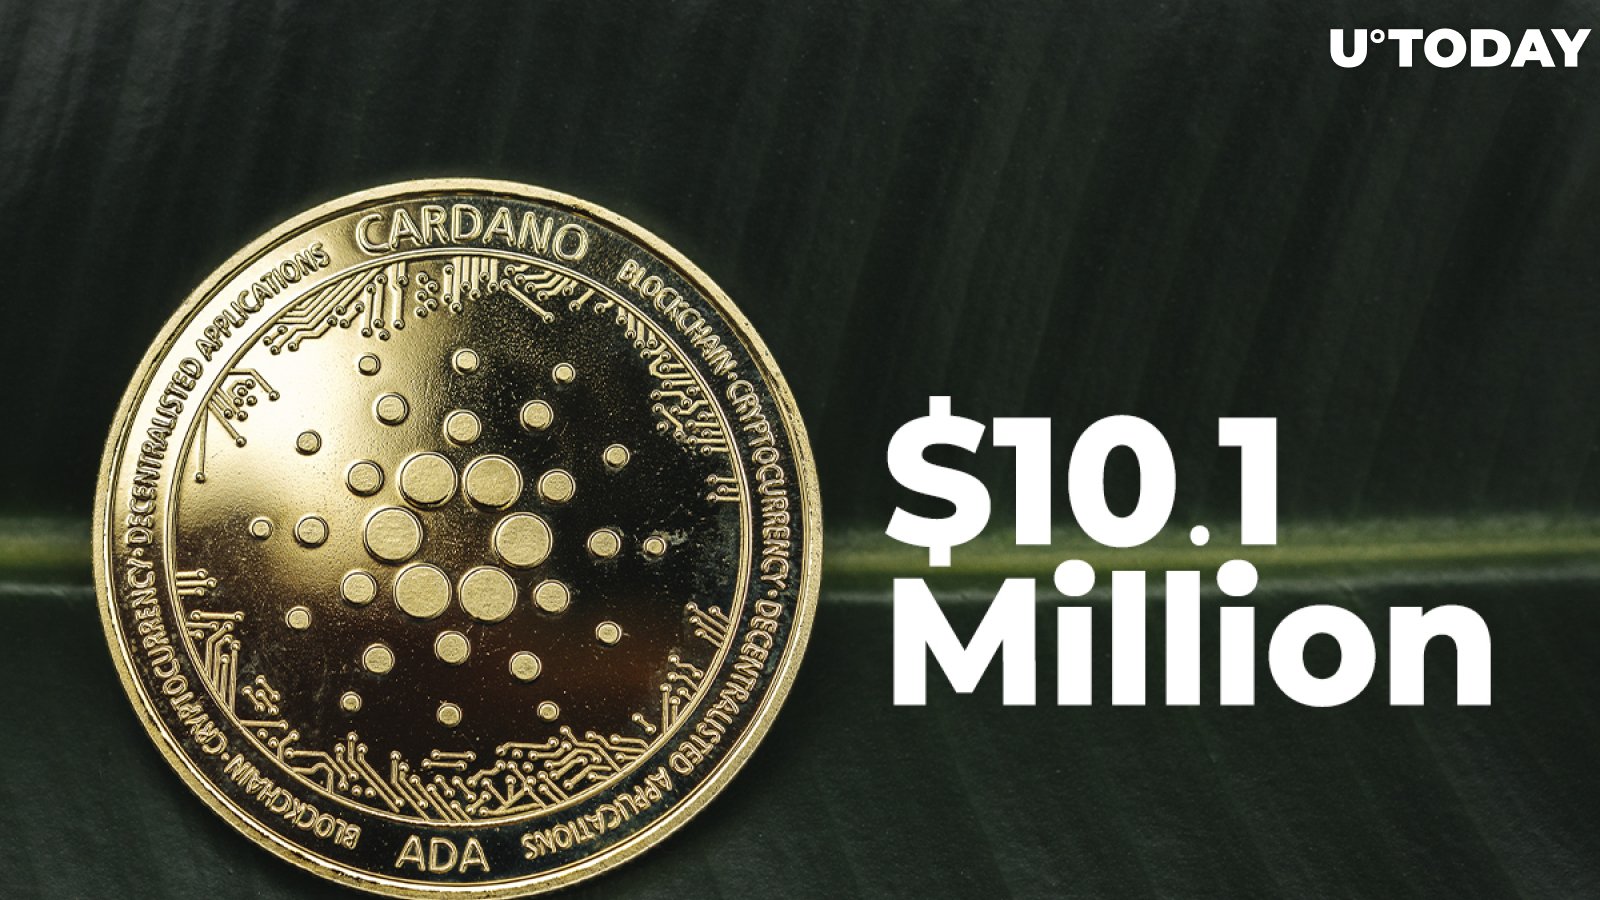 Cardano Sees $10.1 Million Inflows in Past Week, Surpassing XRP and SOL but Not Ethereum